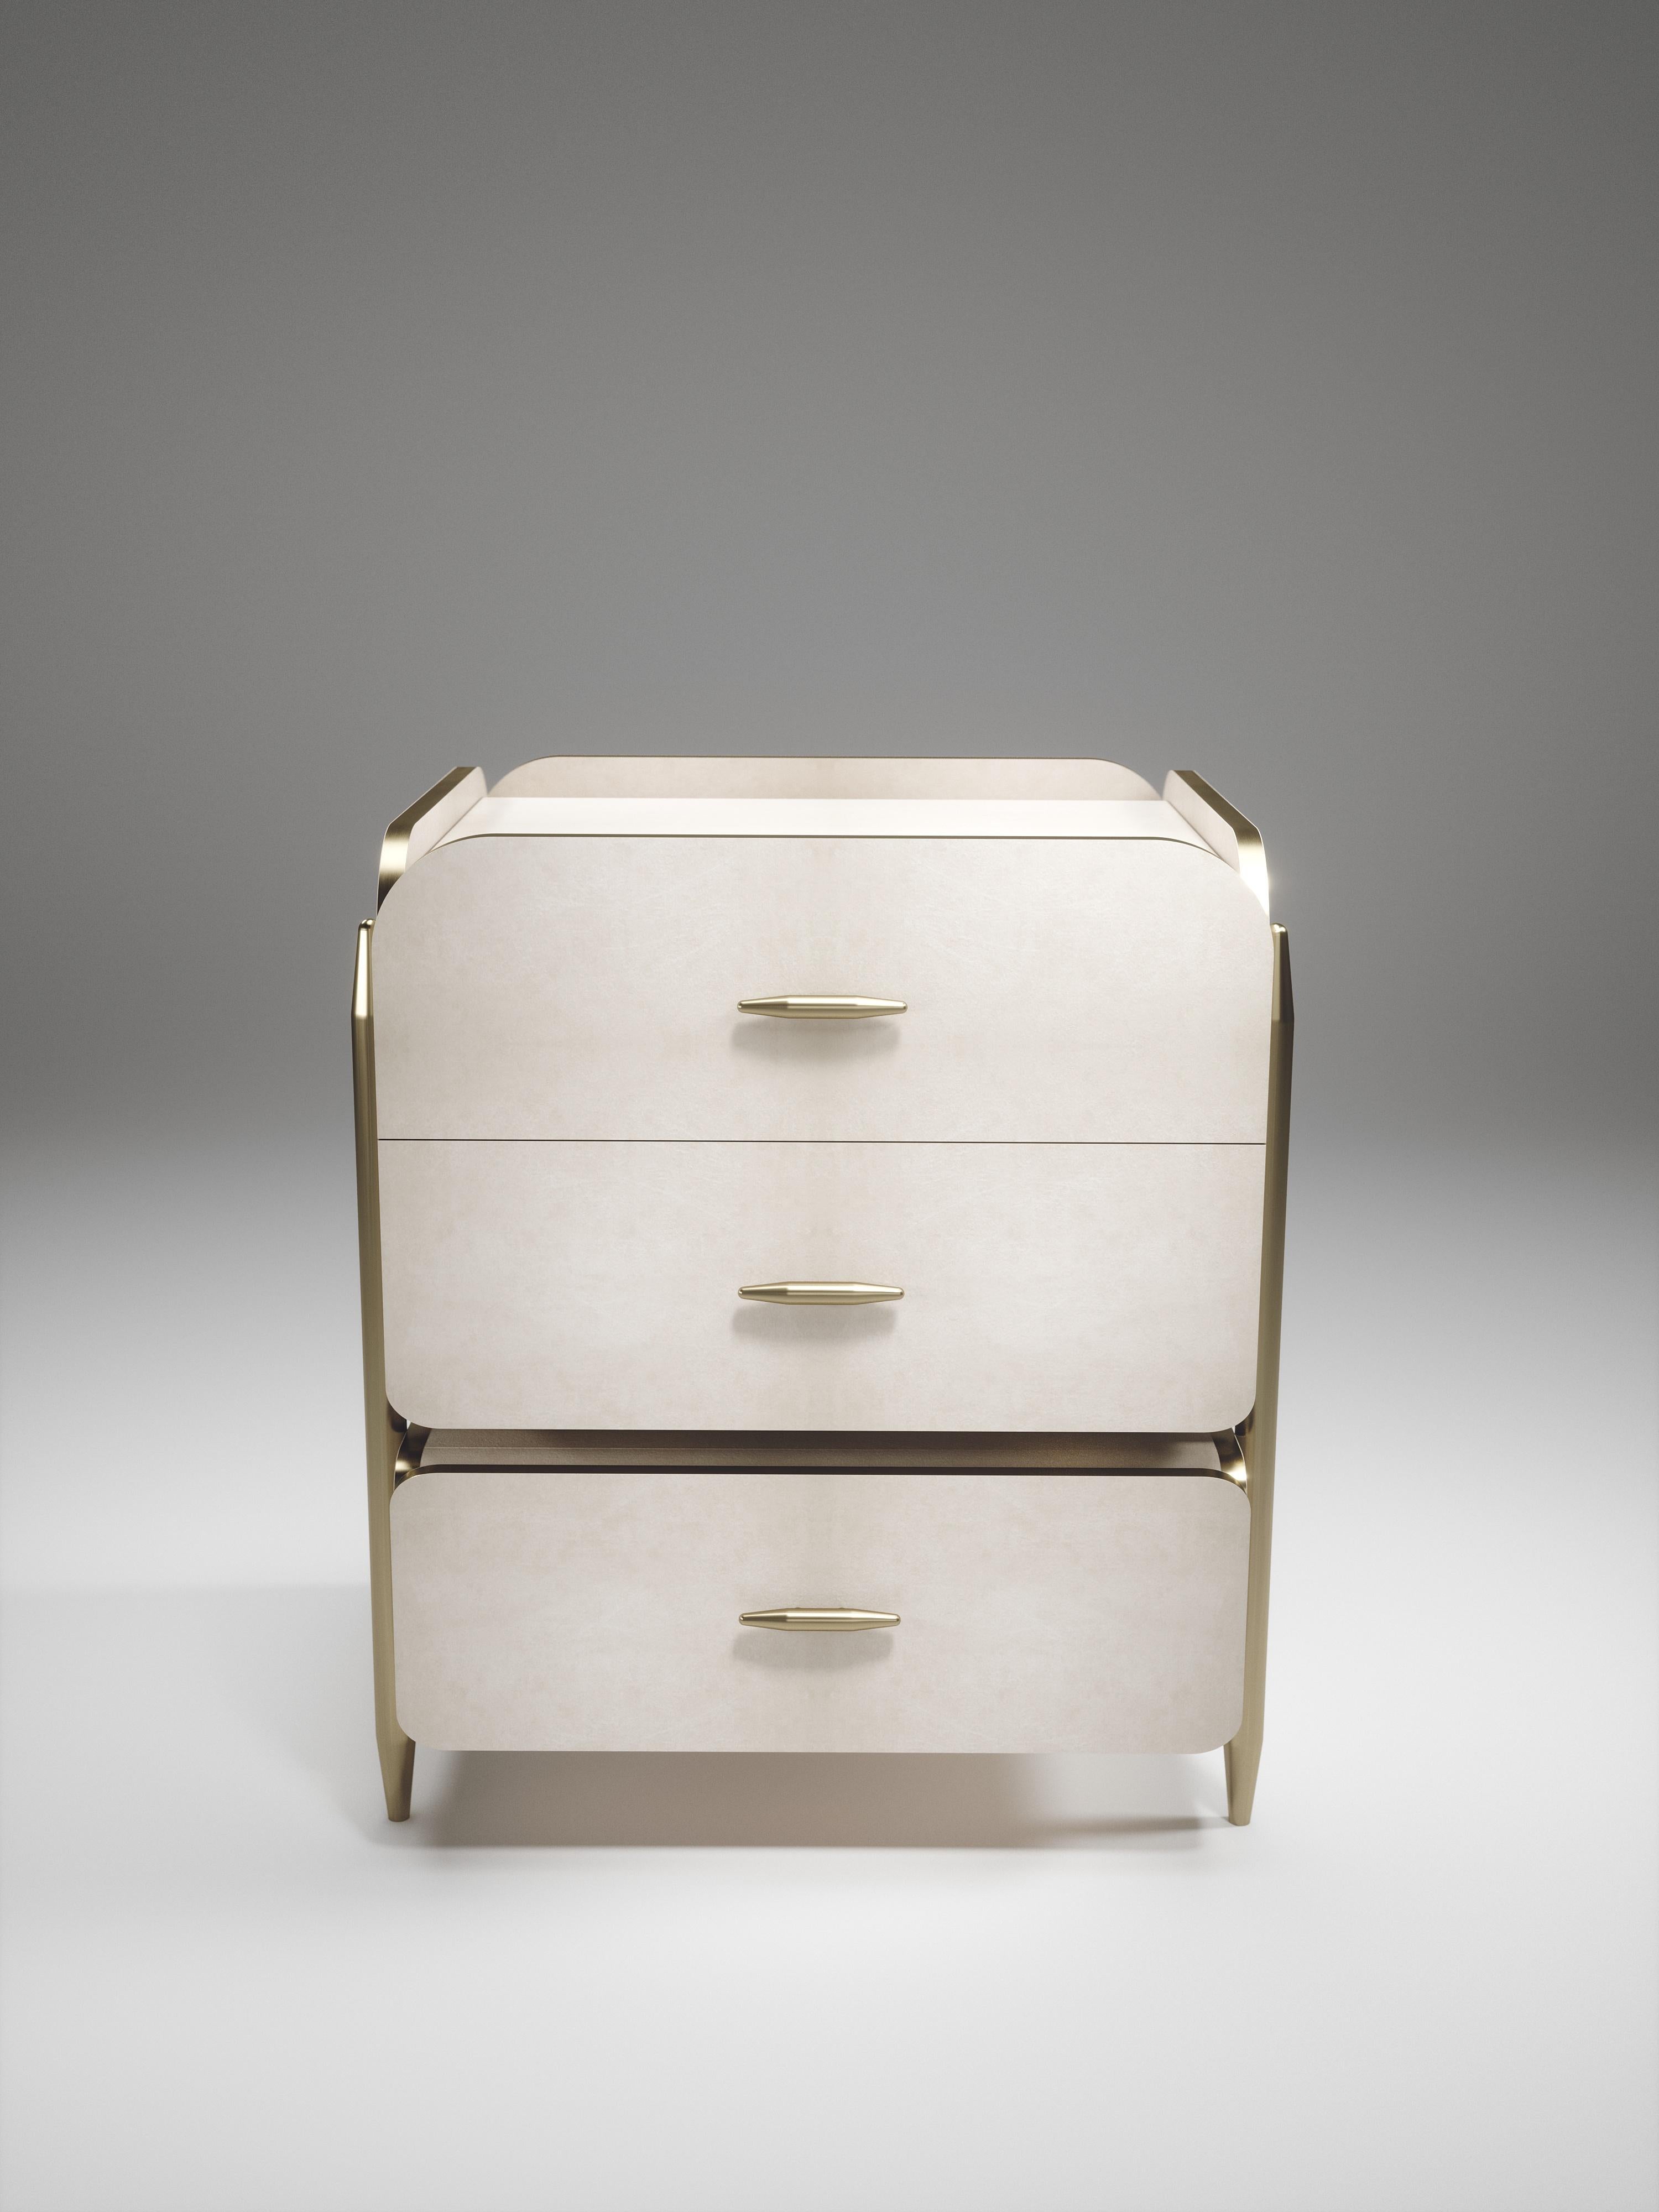 The pair of Dandy square bedside table by Kifu Paris is an elegant and a luxurious home accent, inlaid in cream parchment with bronze-patina brass details. This piece includes 3 drawers total and the interiors are inlaid in gemelina wood veneer.